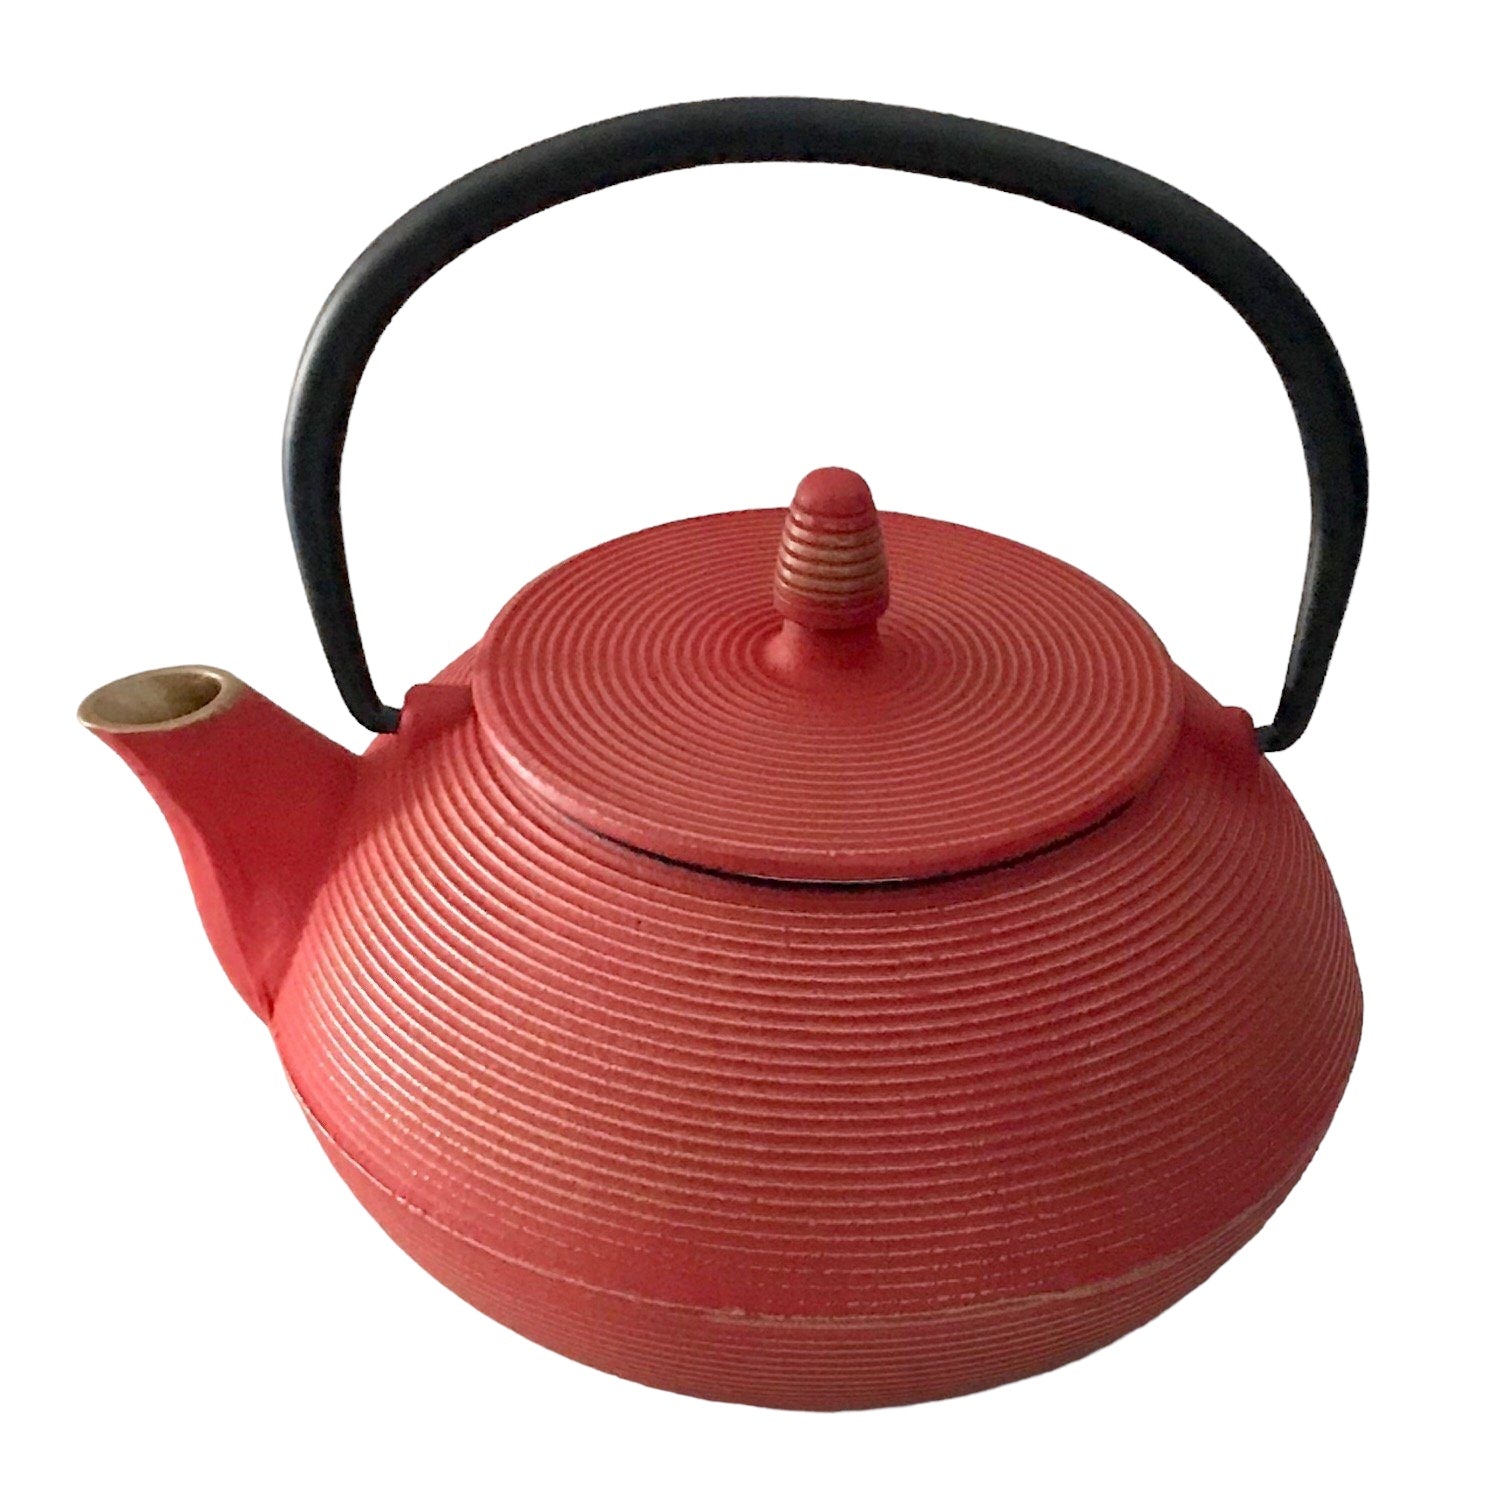 Teapot Cast Iron Red & Gold Wealth 800ml - The Renmy Store Homewares & Gifts 